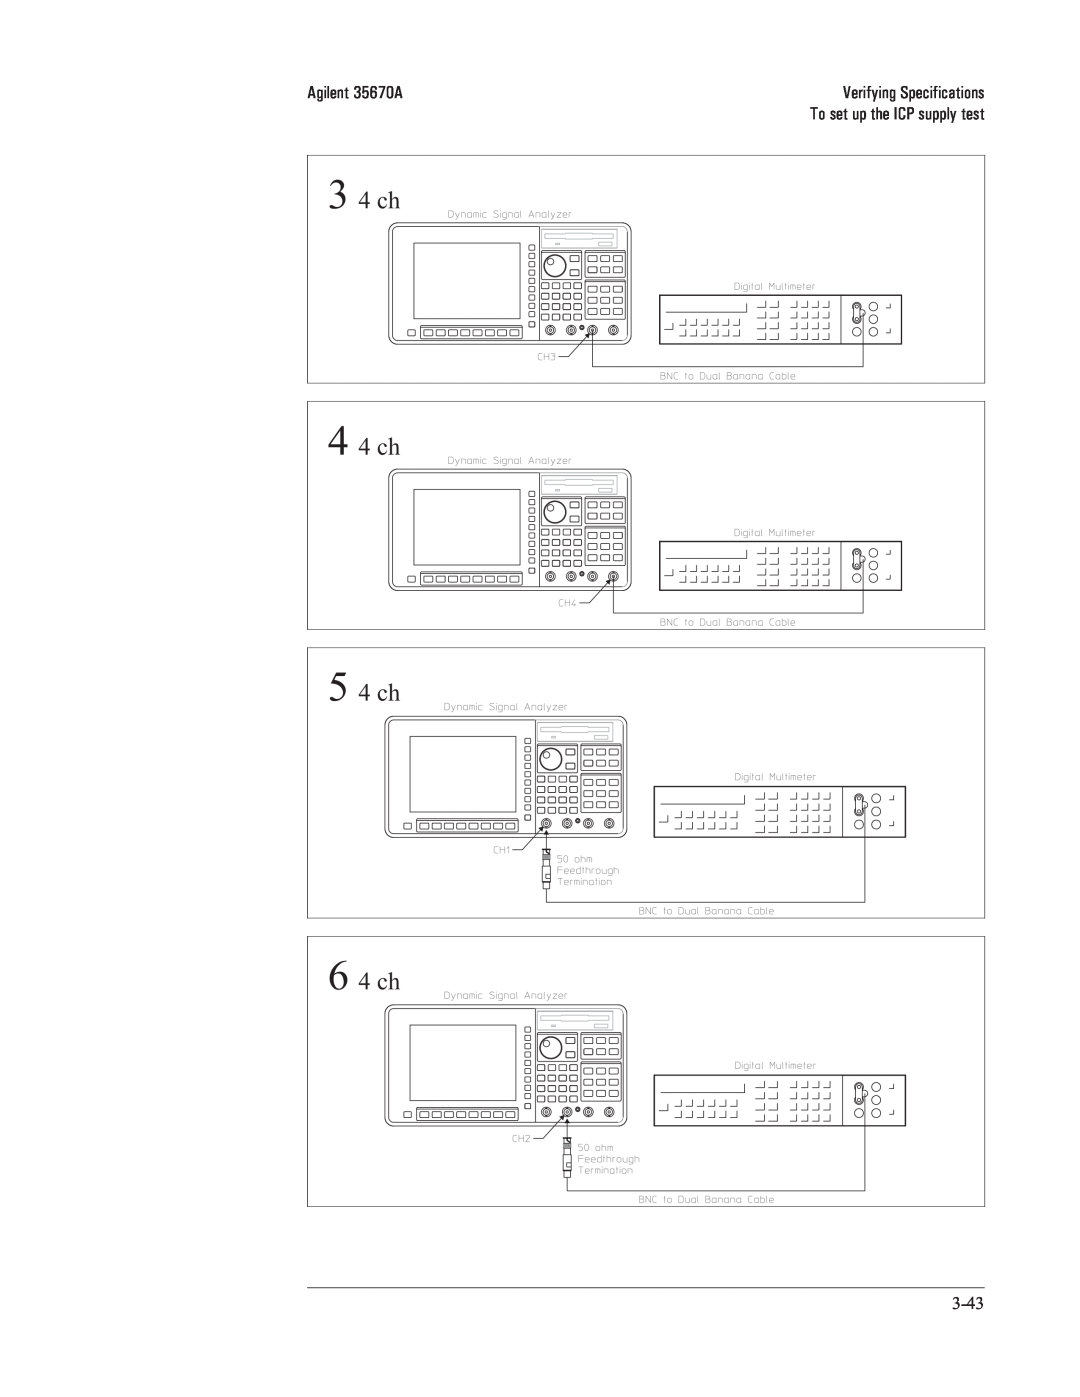 Agilent Technologies 35670-90066 manual 6 4 ch, 3 4 ch, 4 4 ch, 5 4 ch, Agilent 35670A, To set up the ICP supply test 